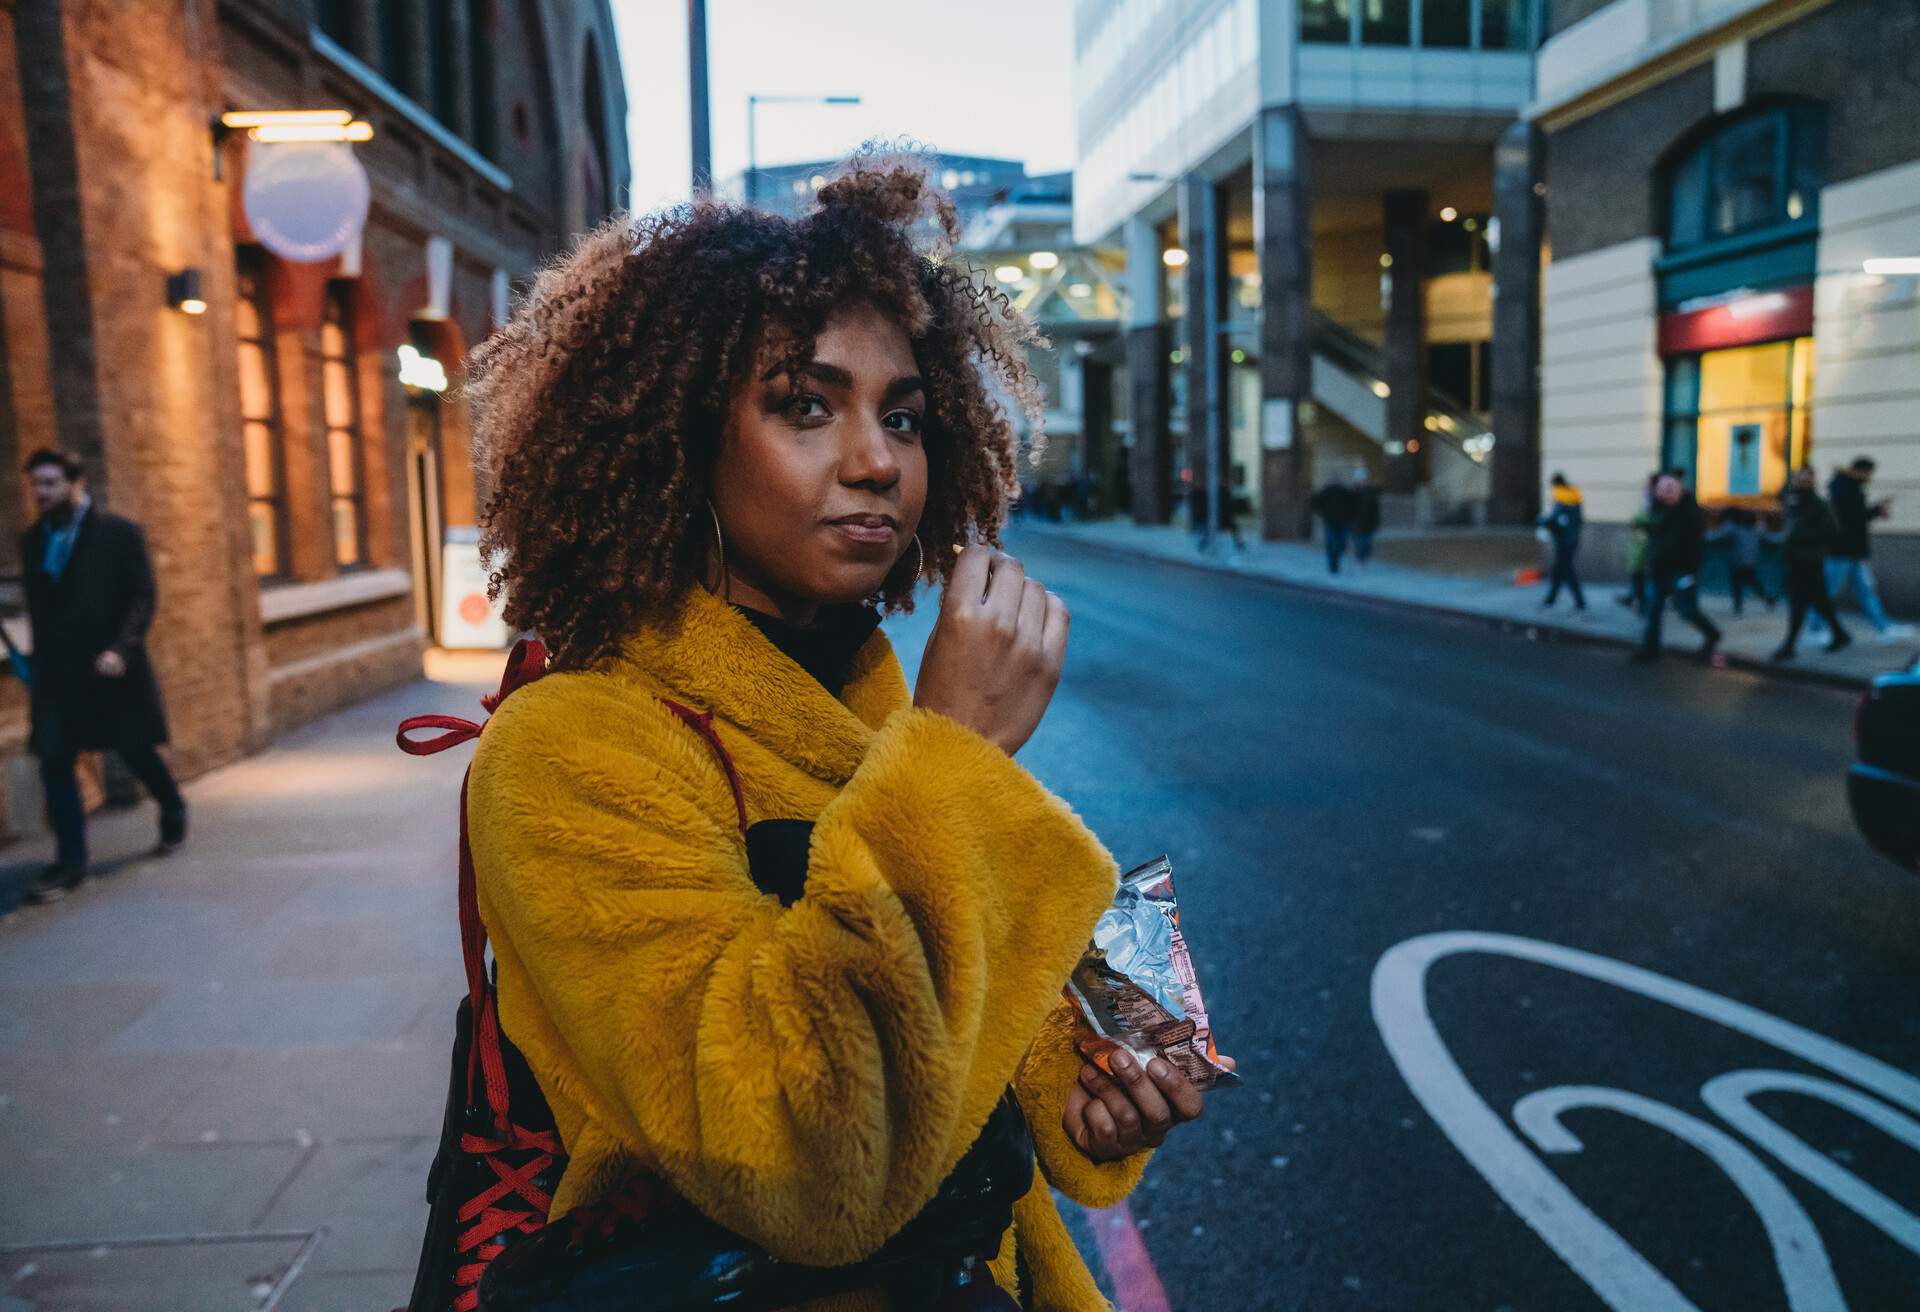 A young woman in a yellow fuzzy coat having a snack while standing on the sidewalk.